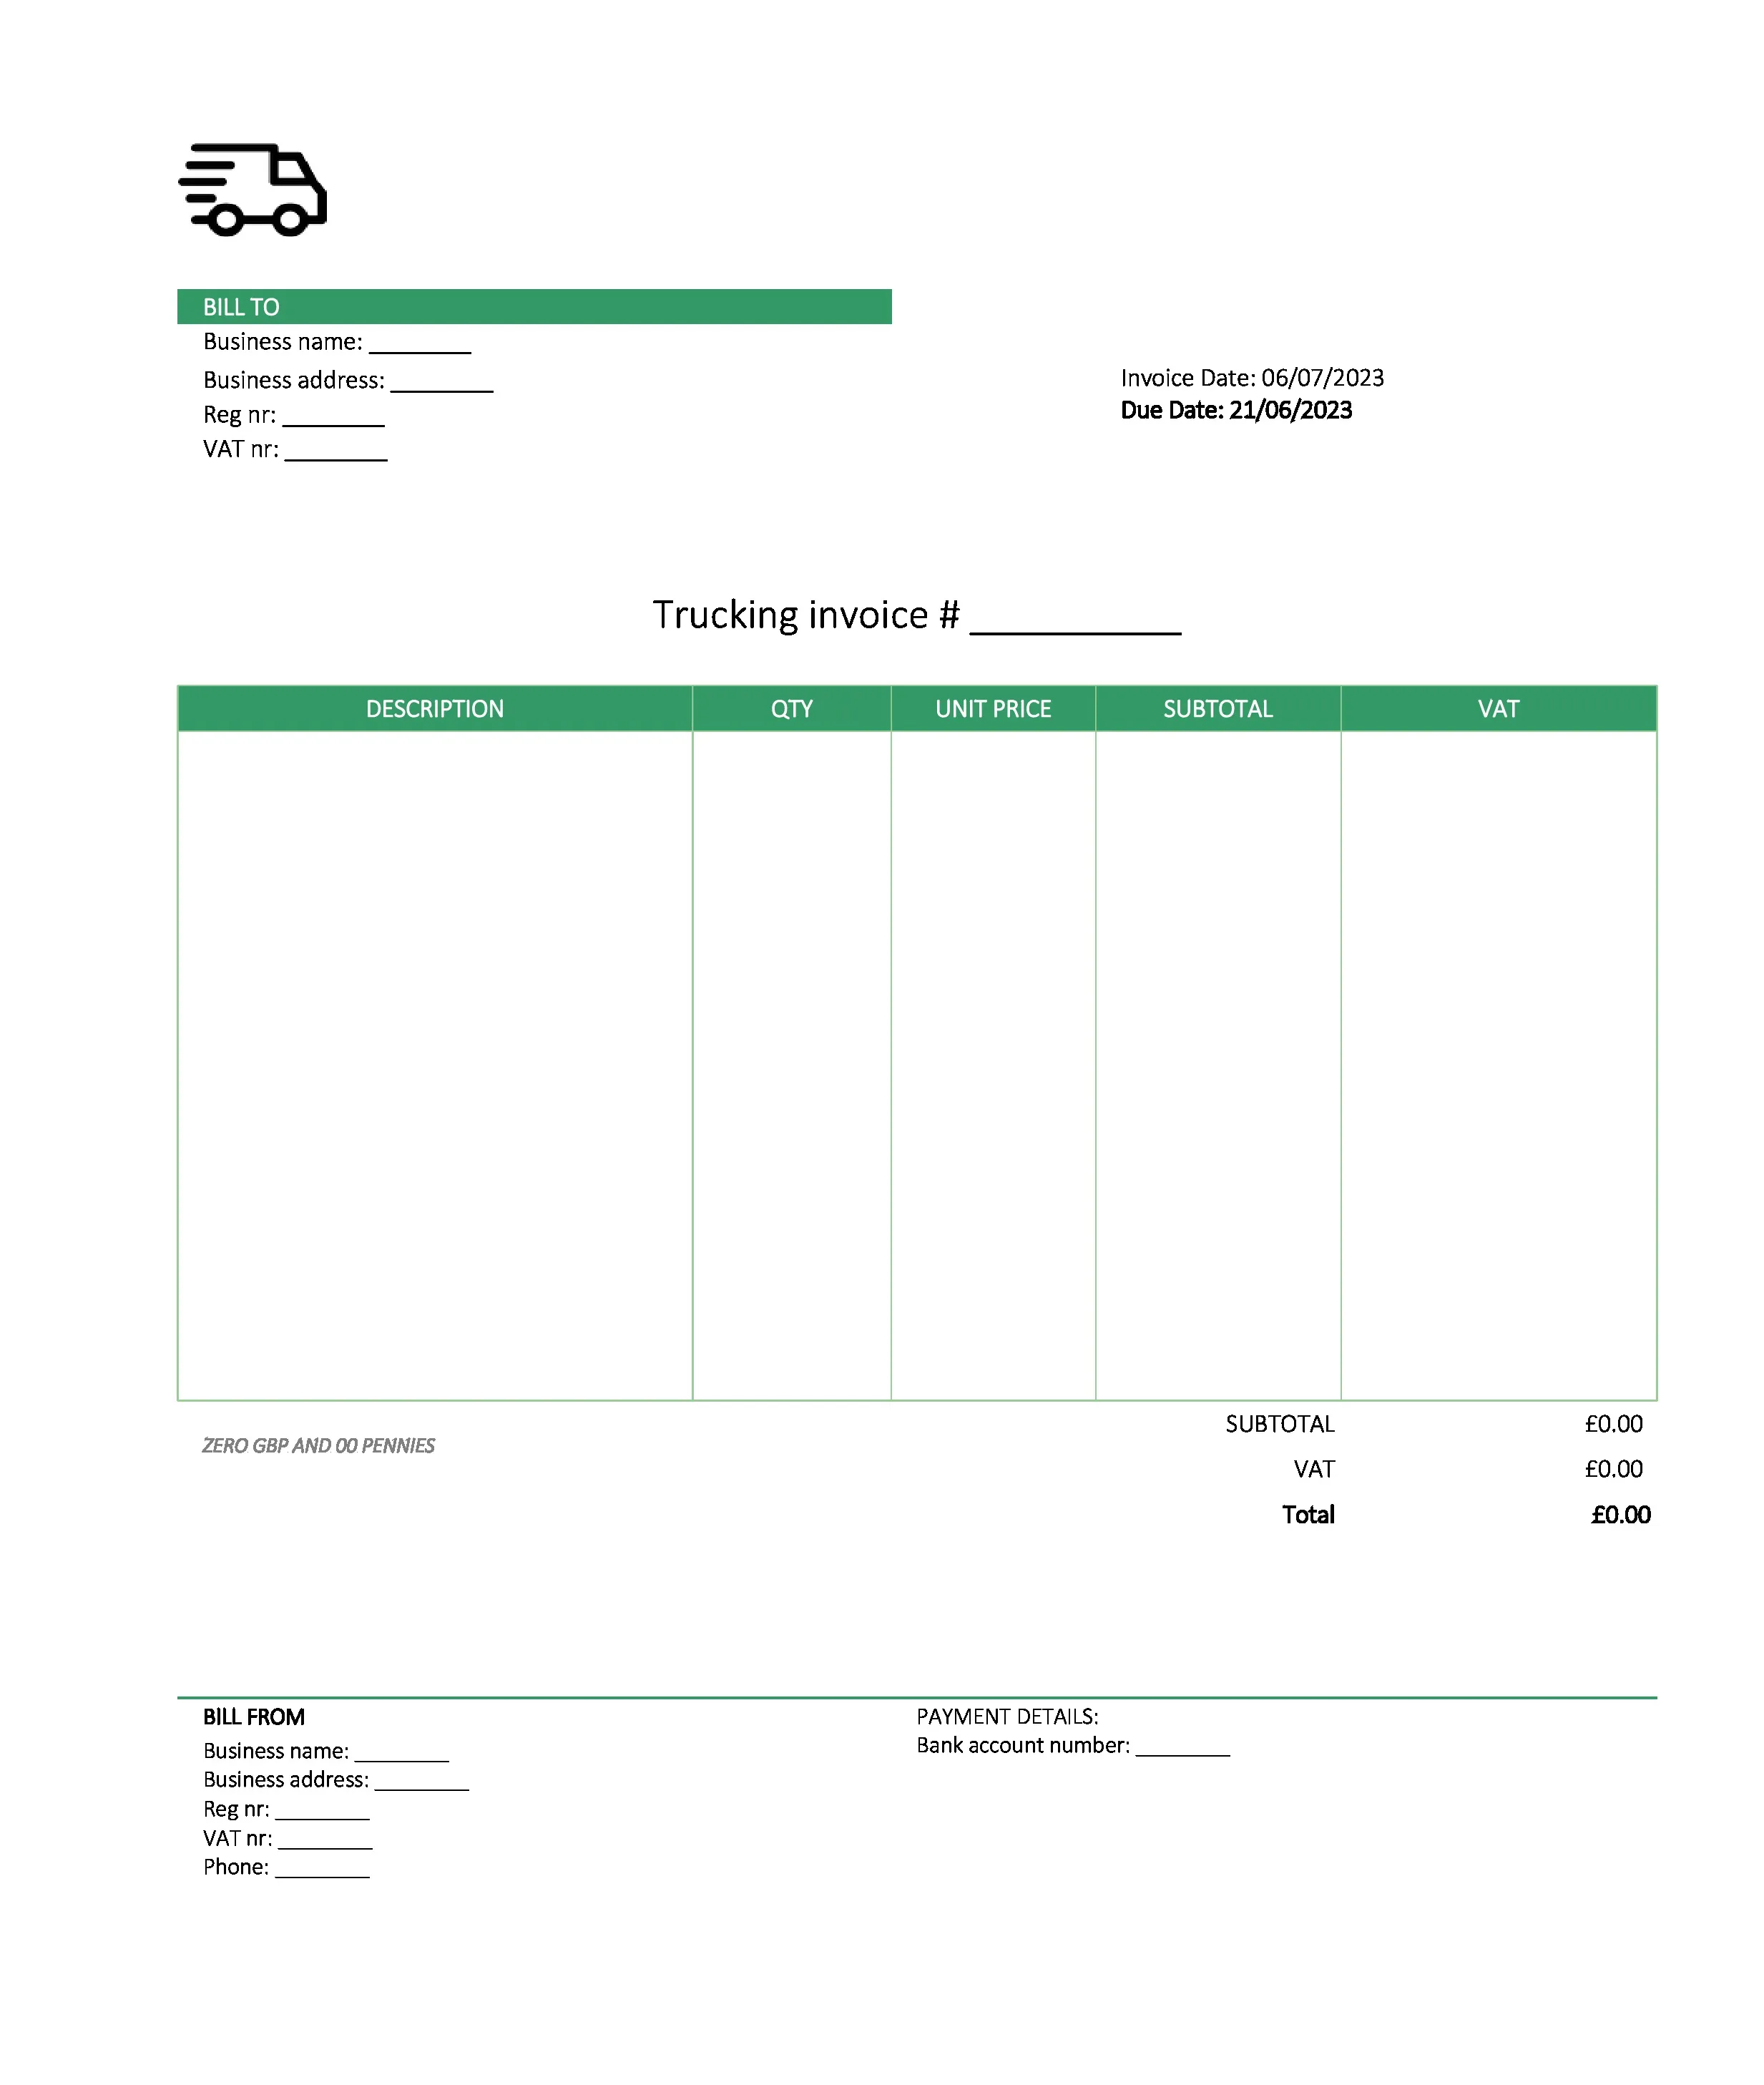 digital trucking invoice template UK Excel / Google sheets